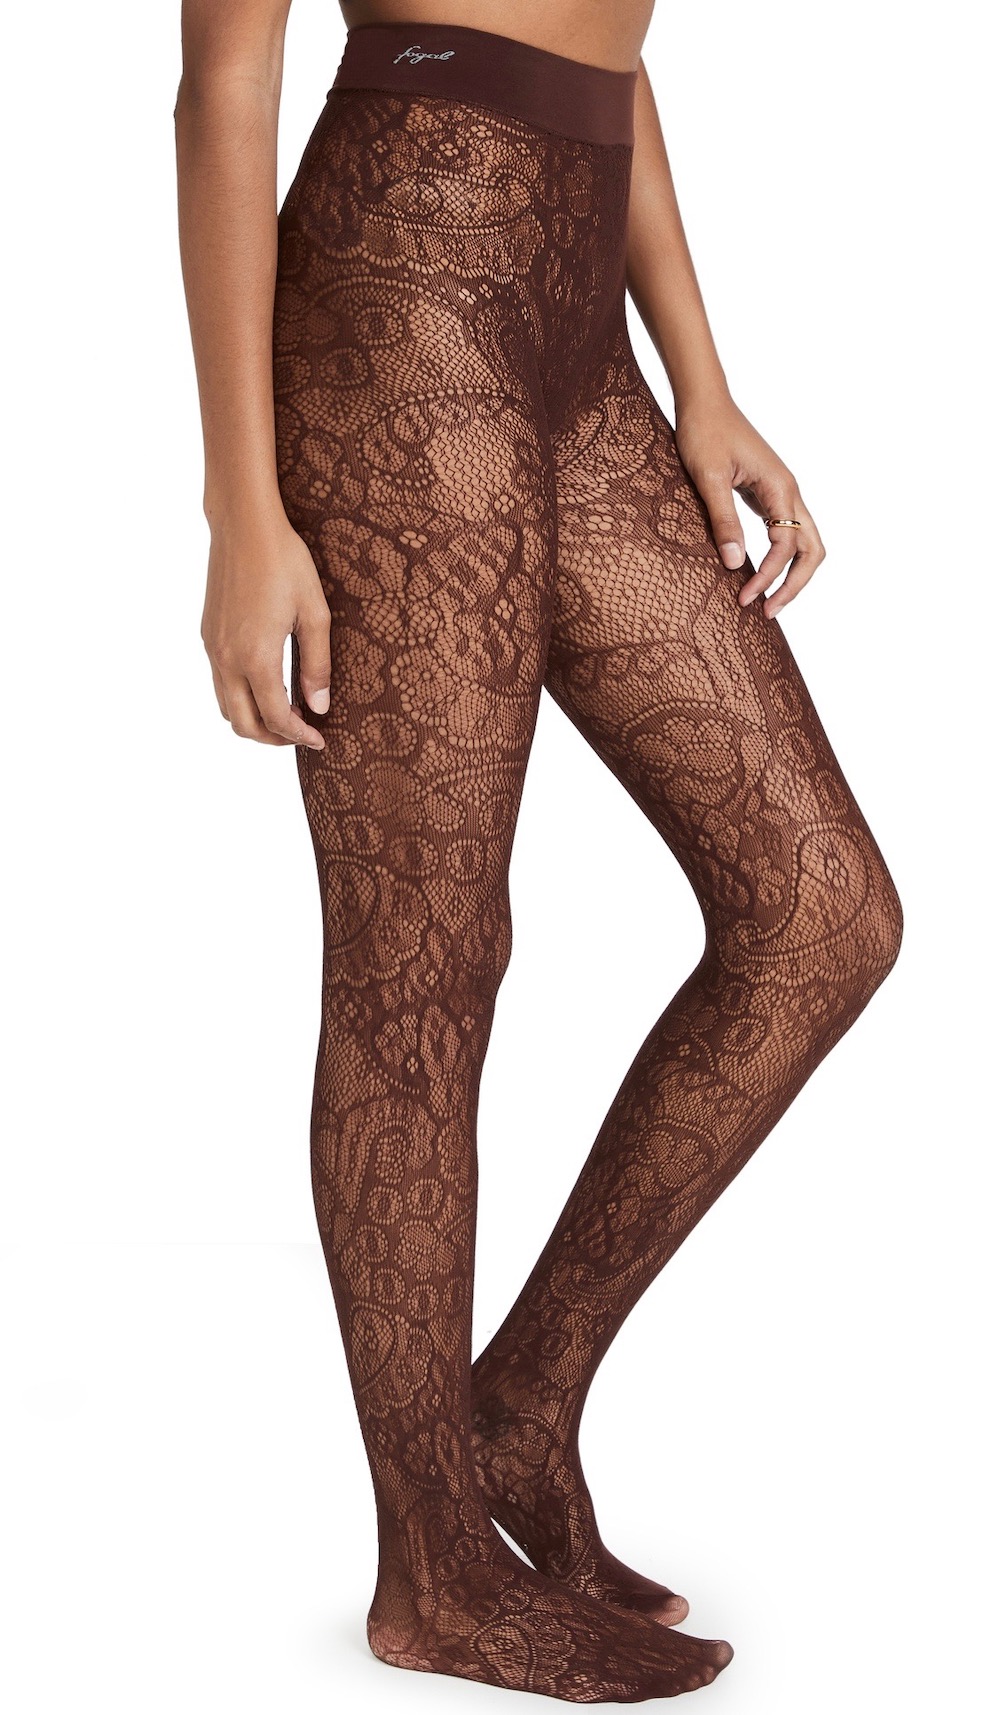 Stylish Tights to Bring Out Your Inner Street Style Star